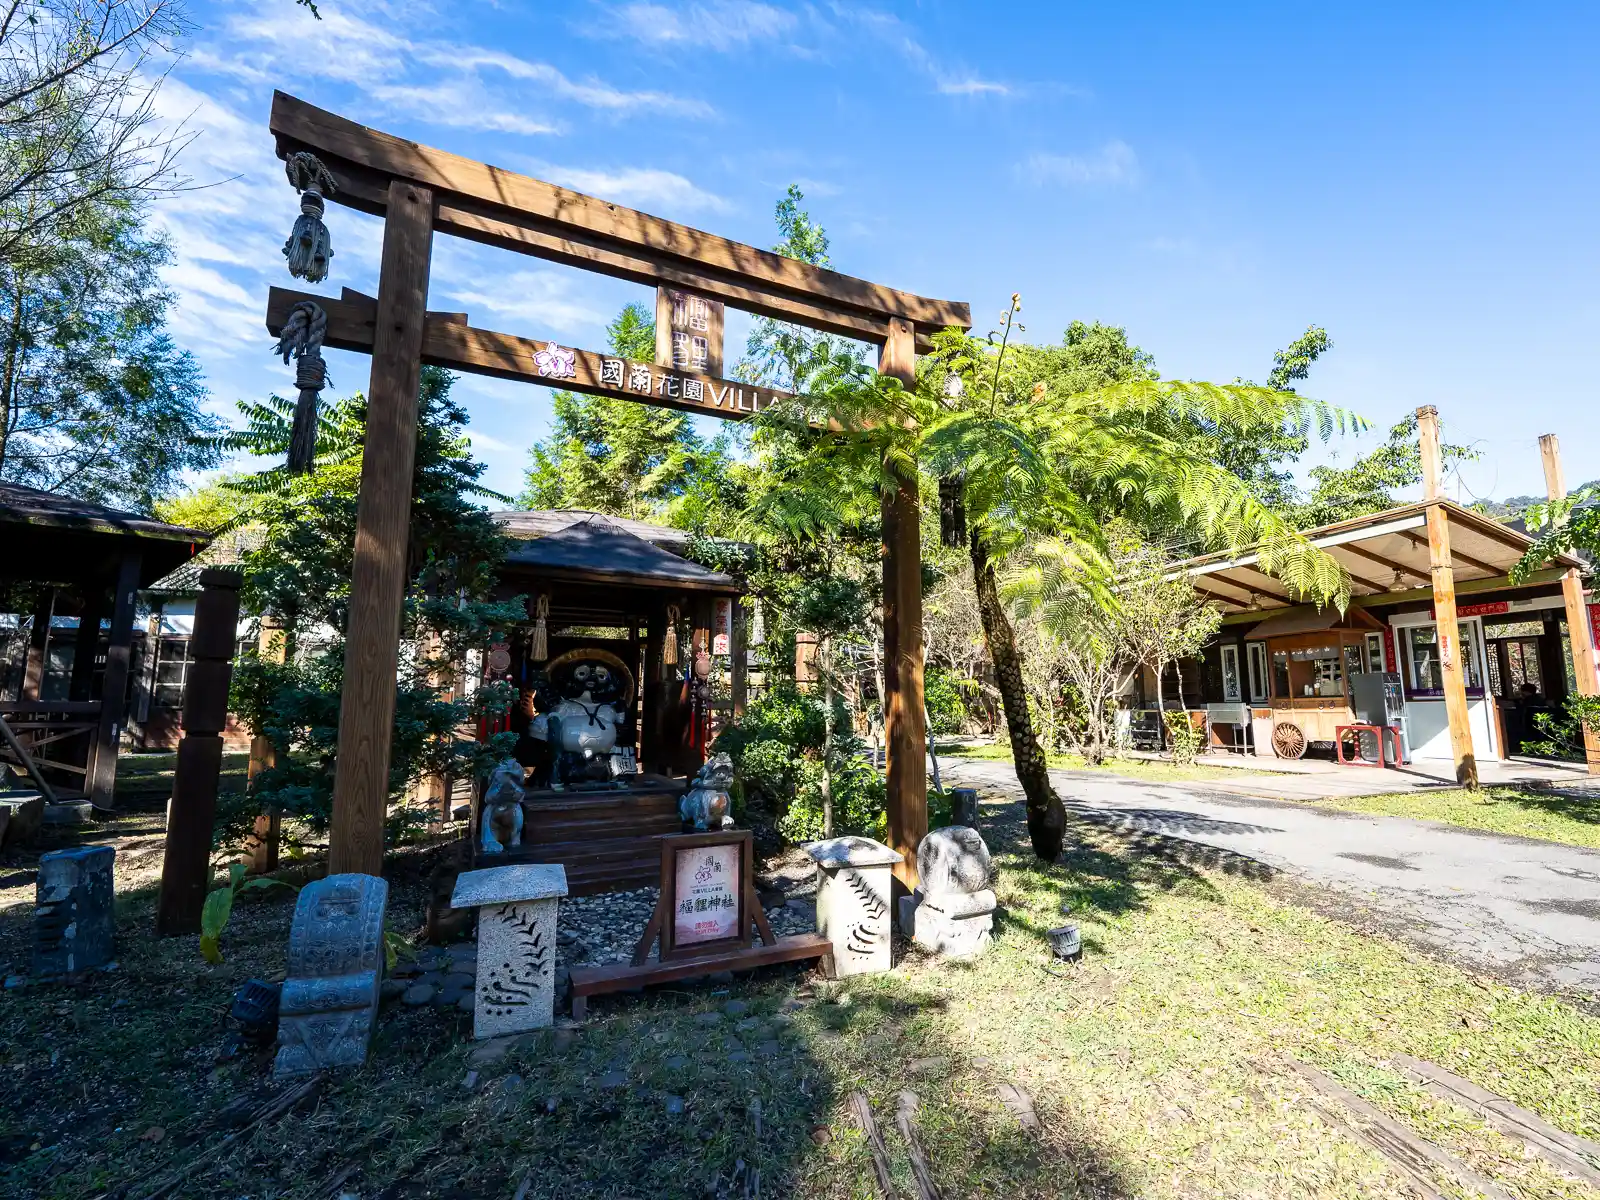 The entrance to a lush hot spring resort.